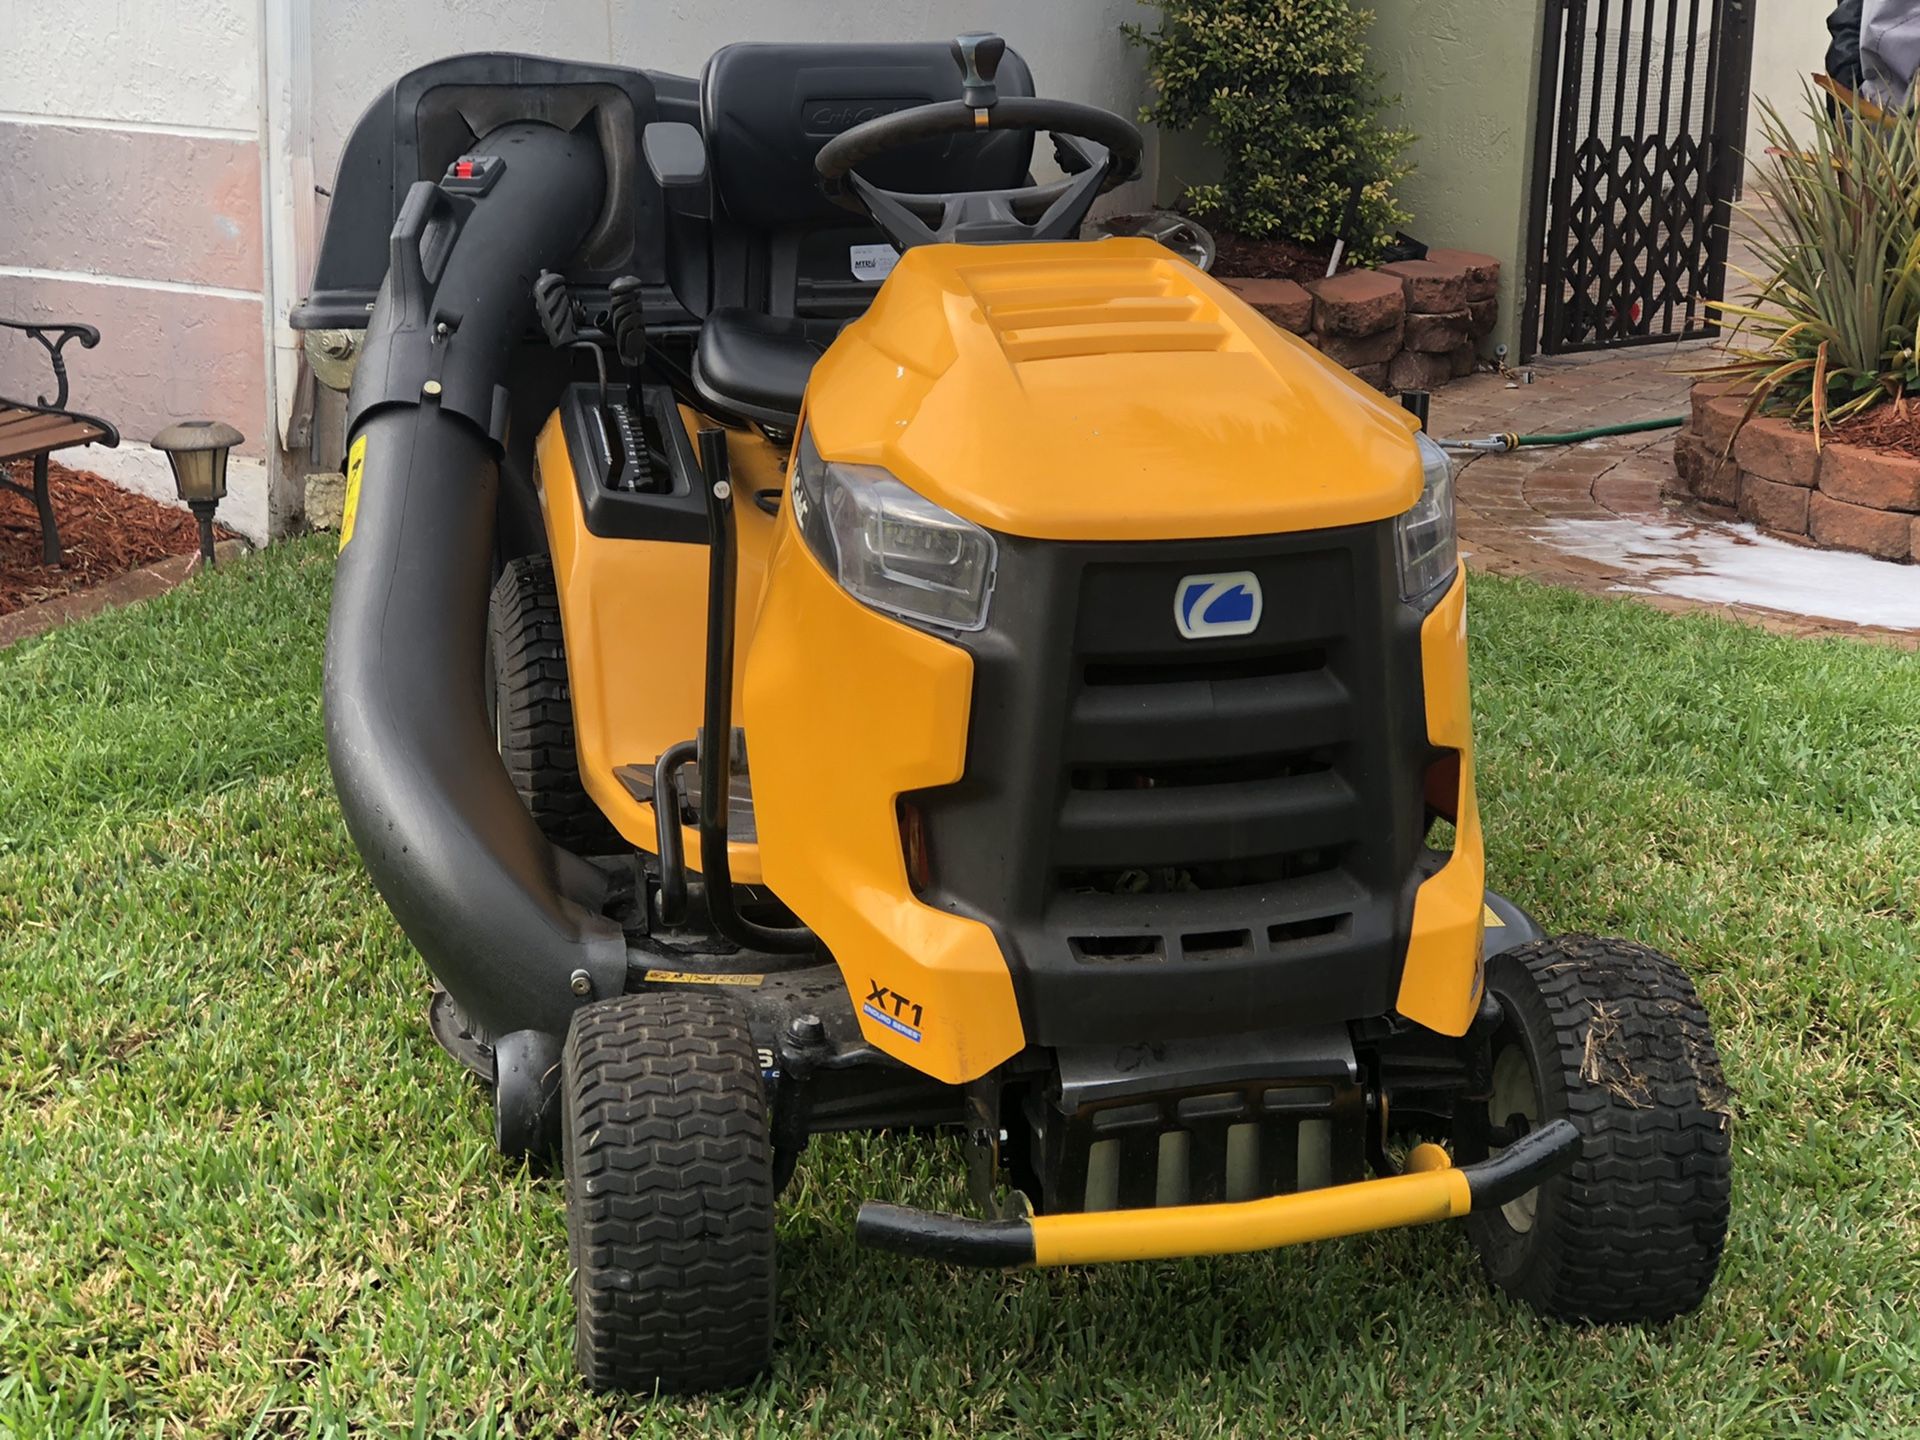 Cub Cadet 46” Deck XT1 Enduro Series/reduced for quick moving sale!!!!